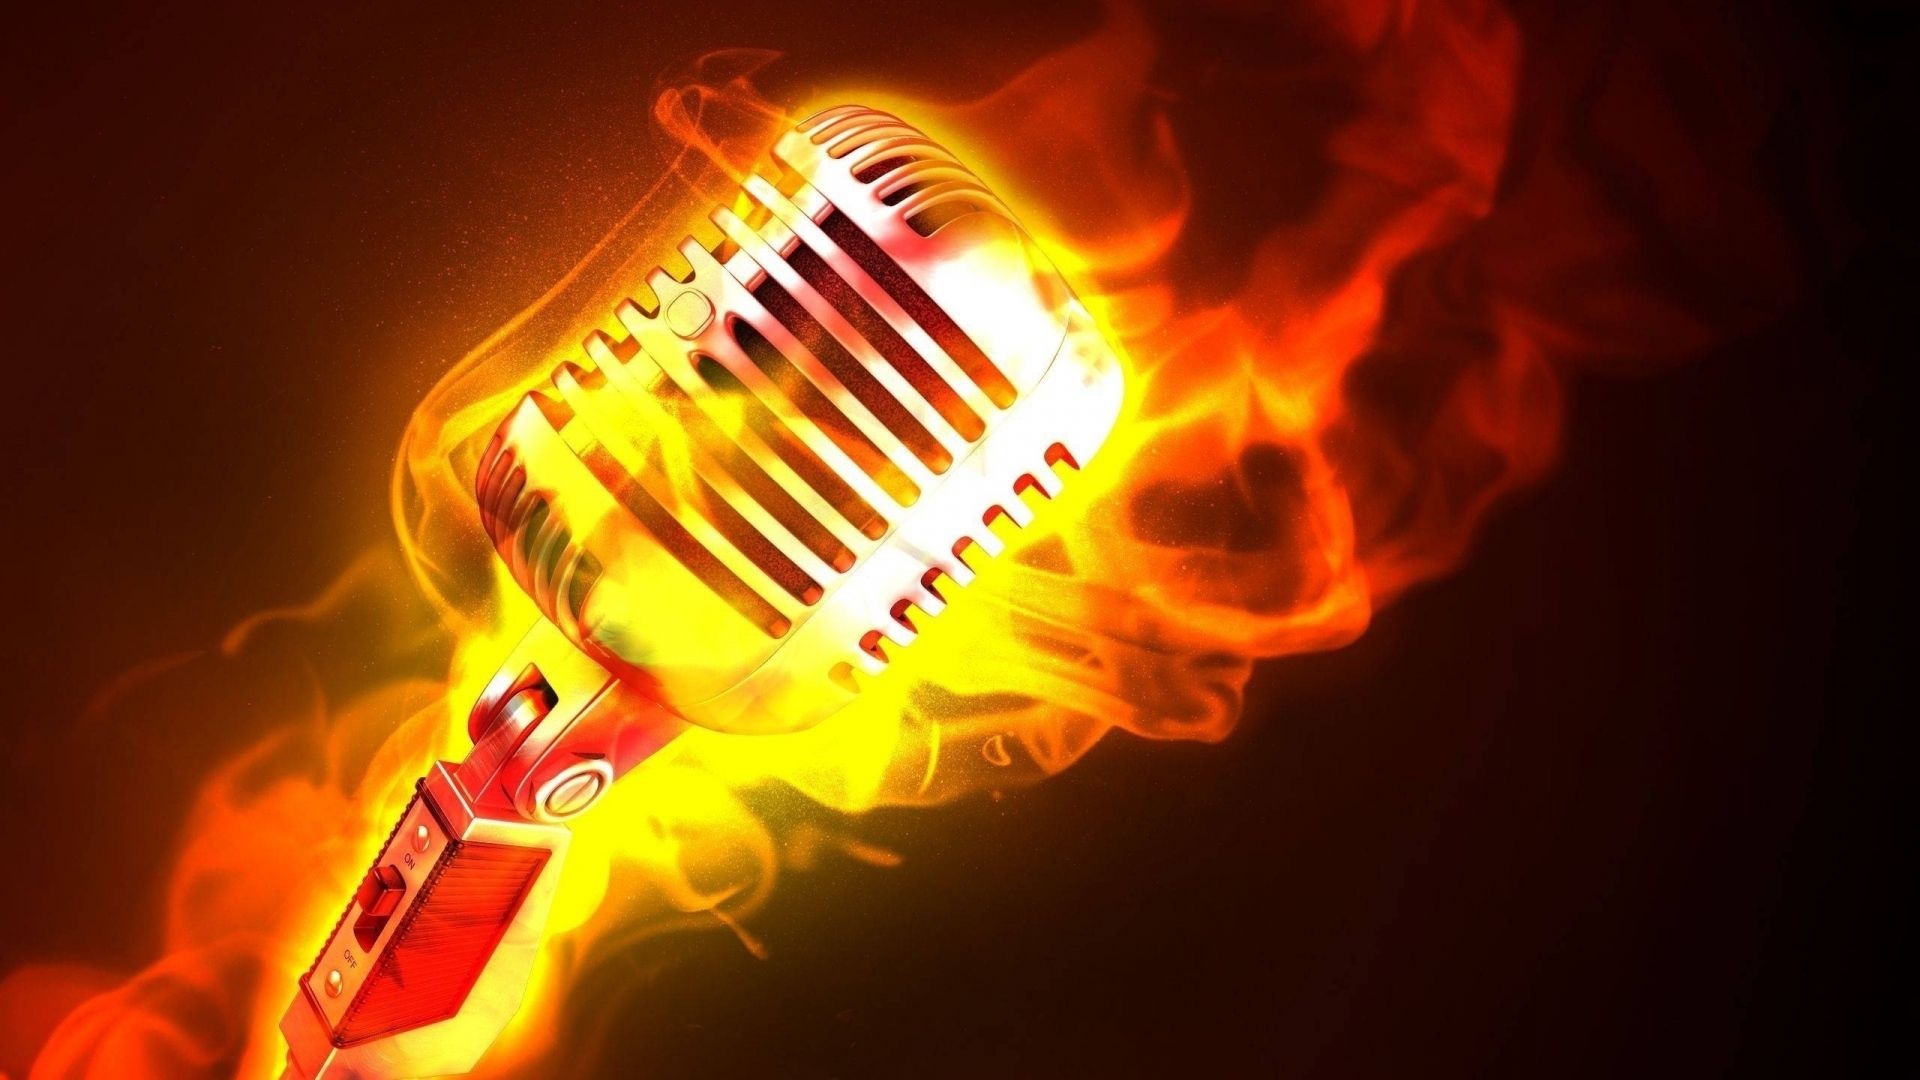 Karaoke: Shure Brothers microphone, Singing along to a music track. 1920x1080 Full HD Background.